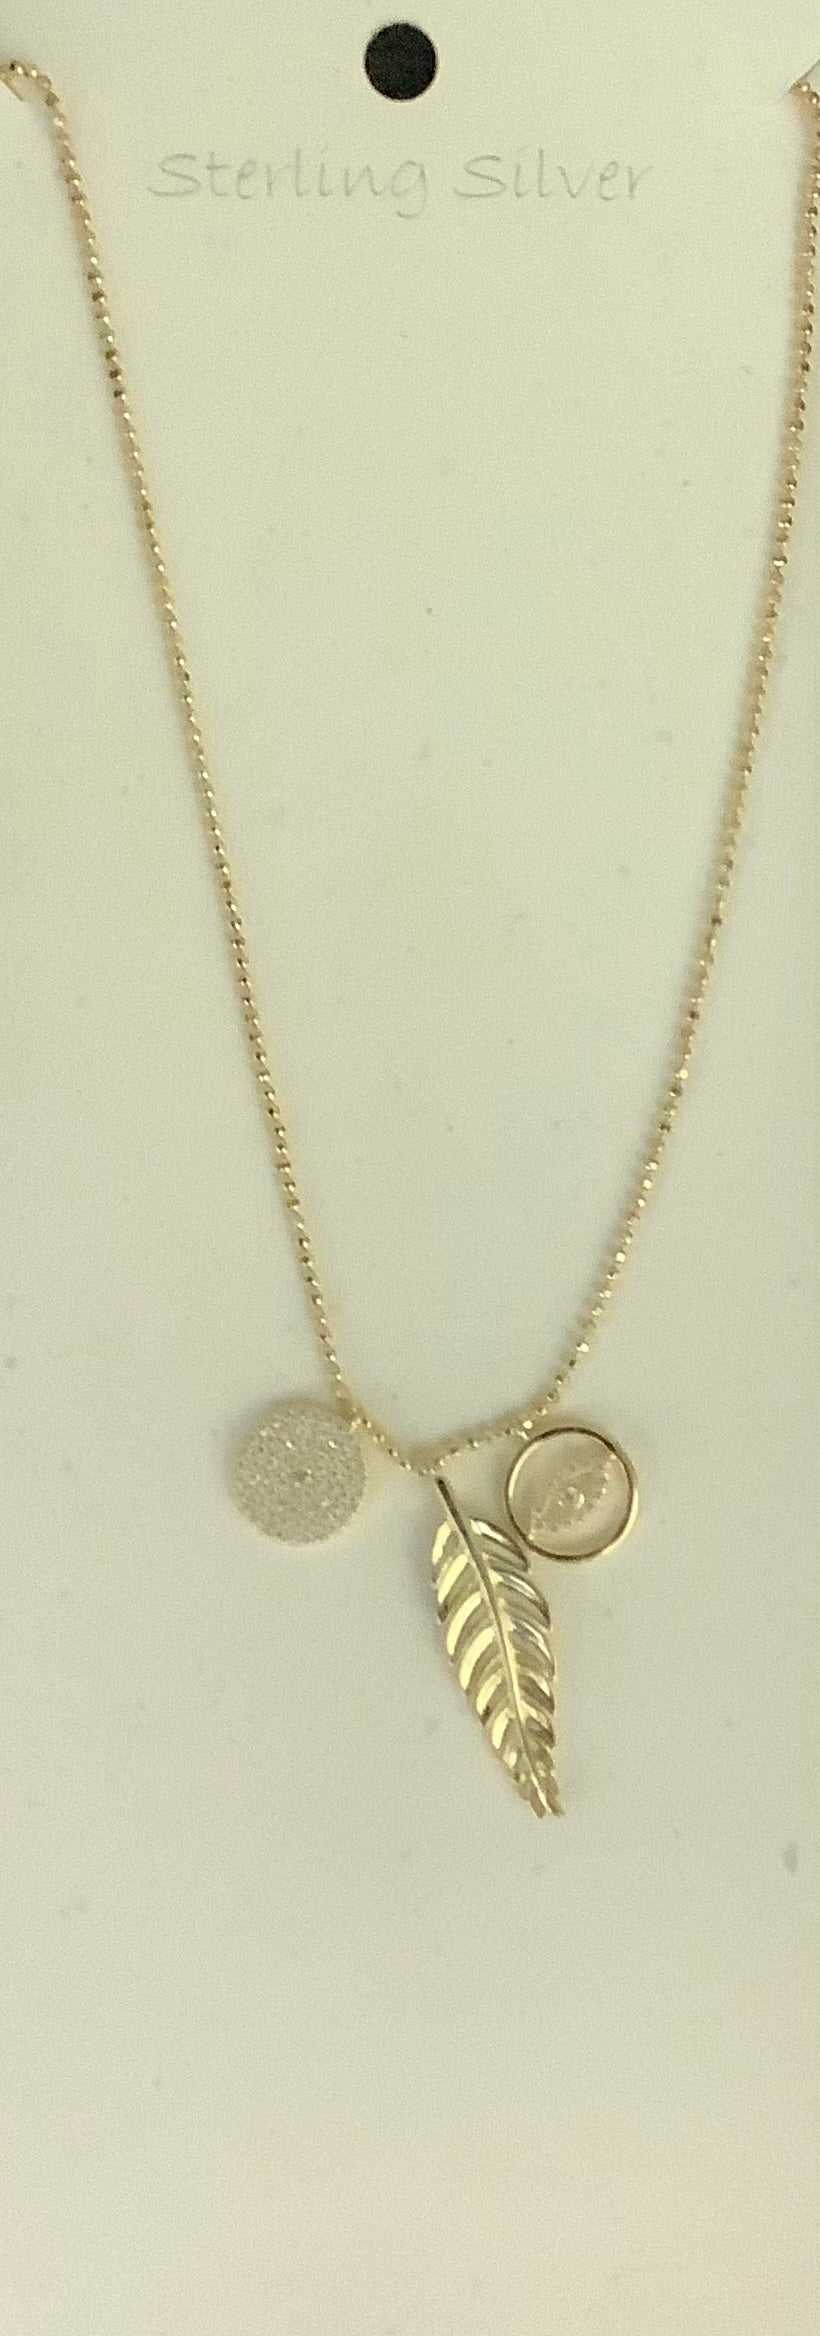 3 Charm Necklace